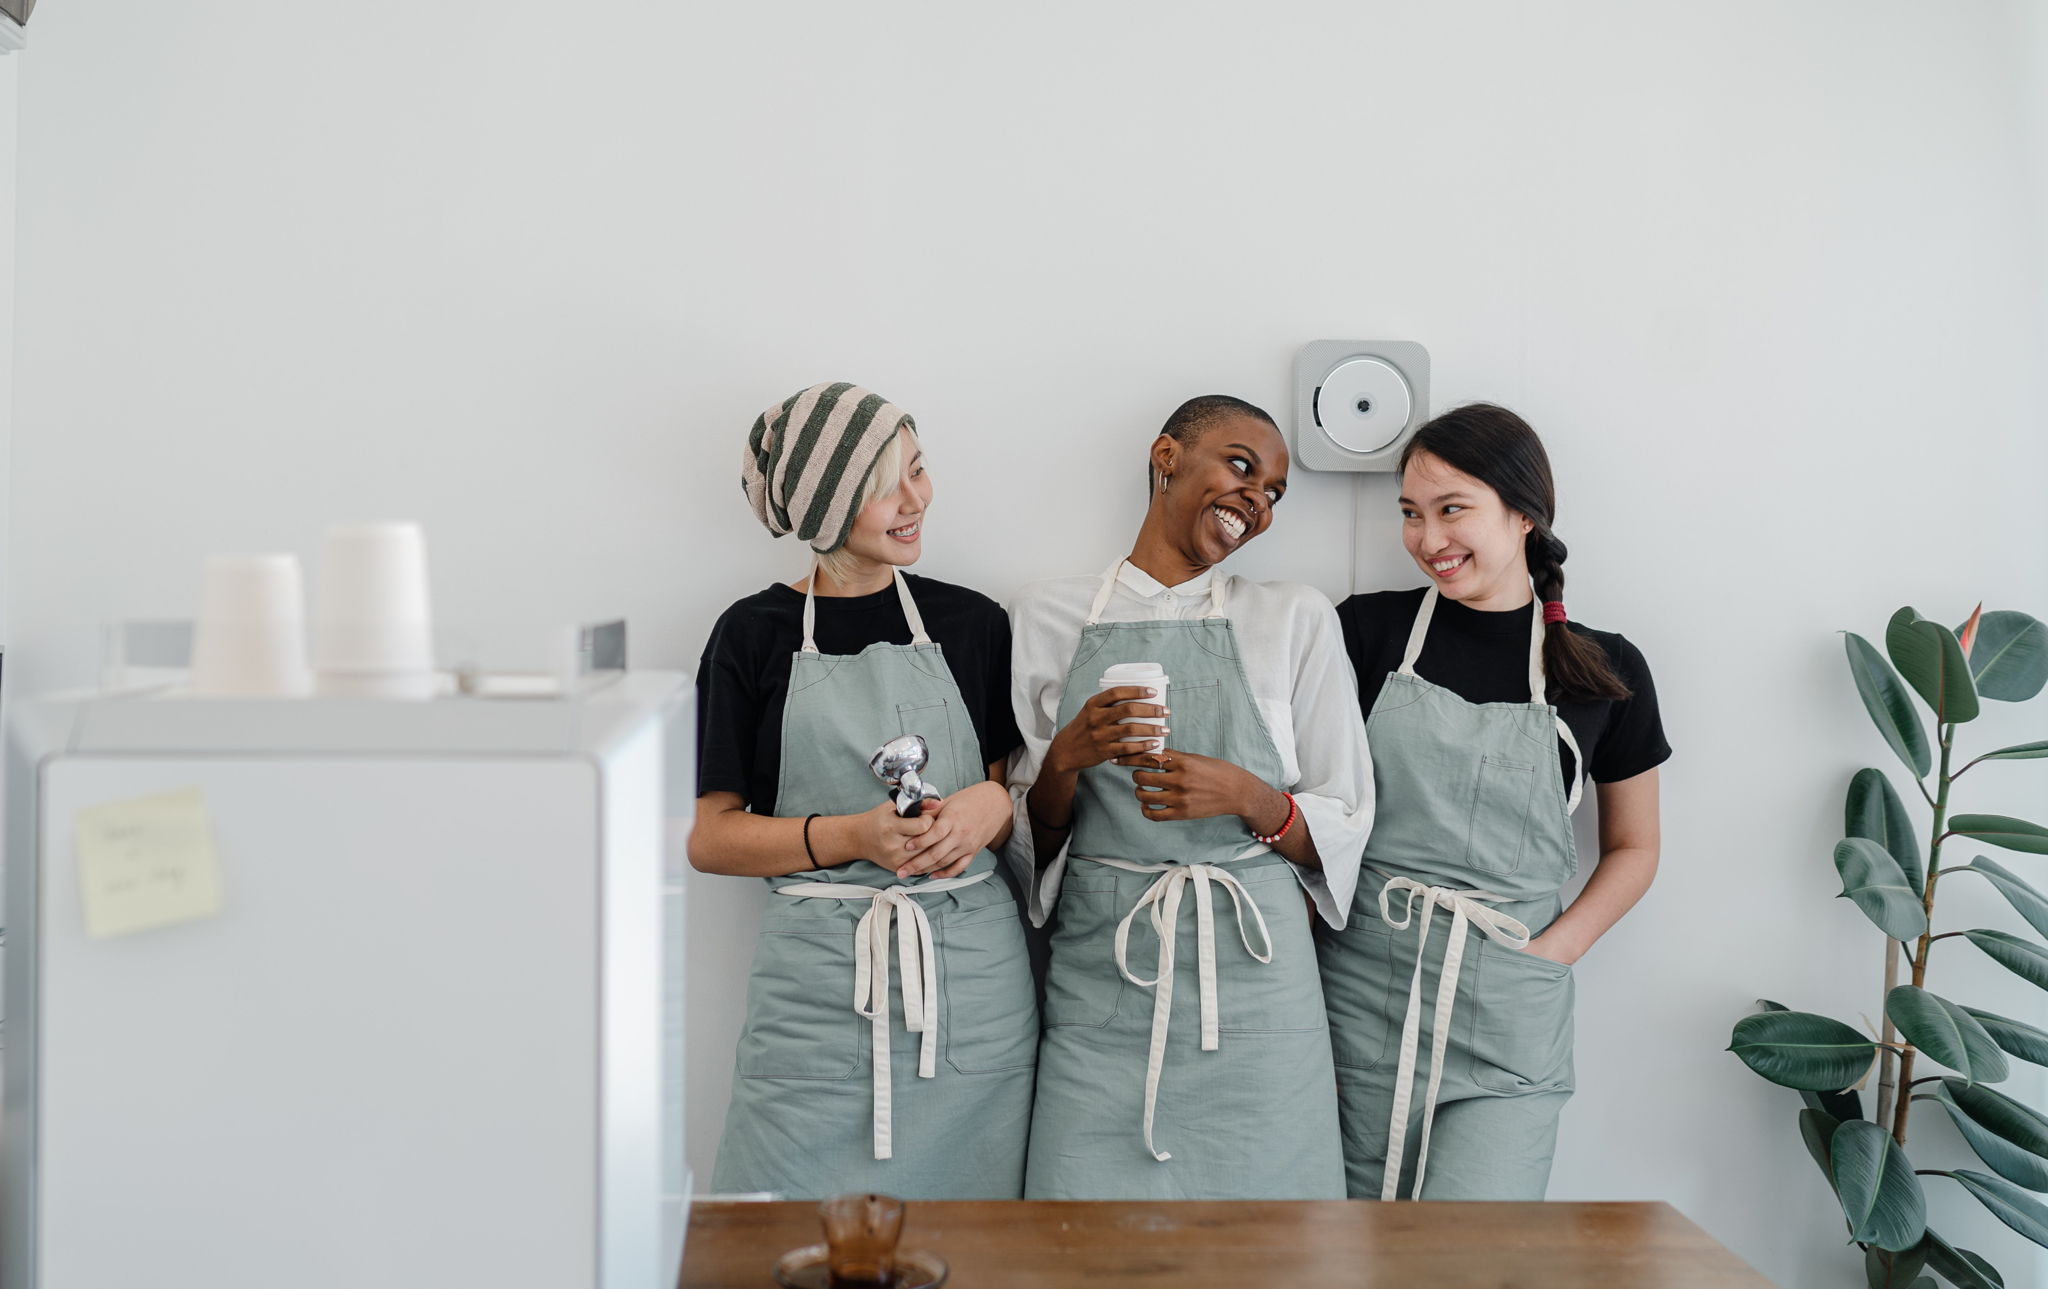 Image of 3 friends who work at the same cafe, wearing their aprons and smiling to eachother. The cafe has plants and a minimalist aesthetic.